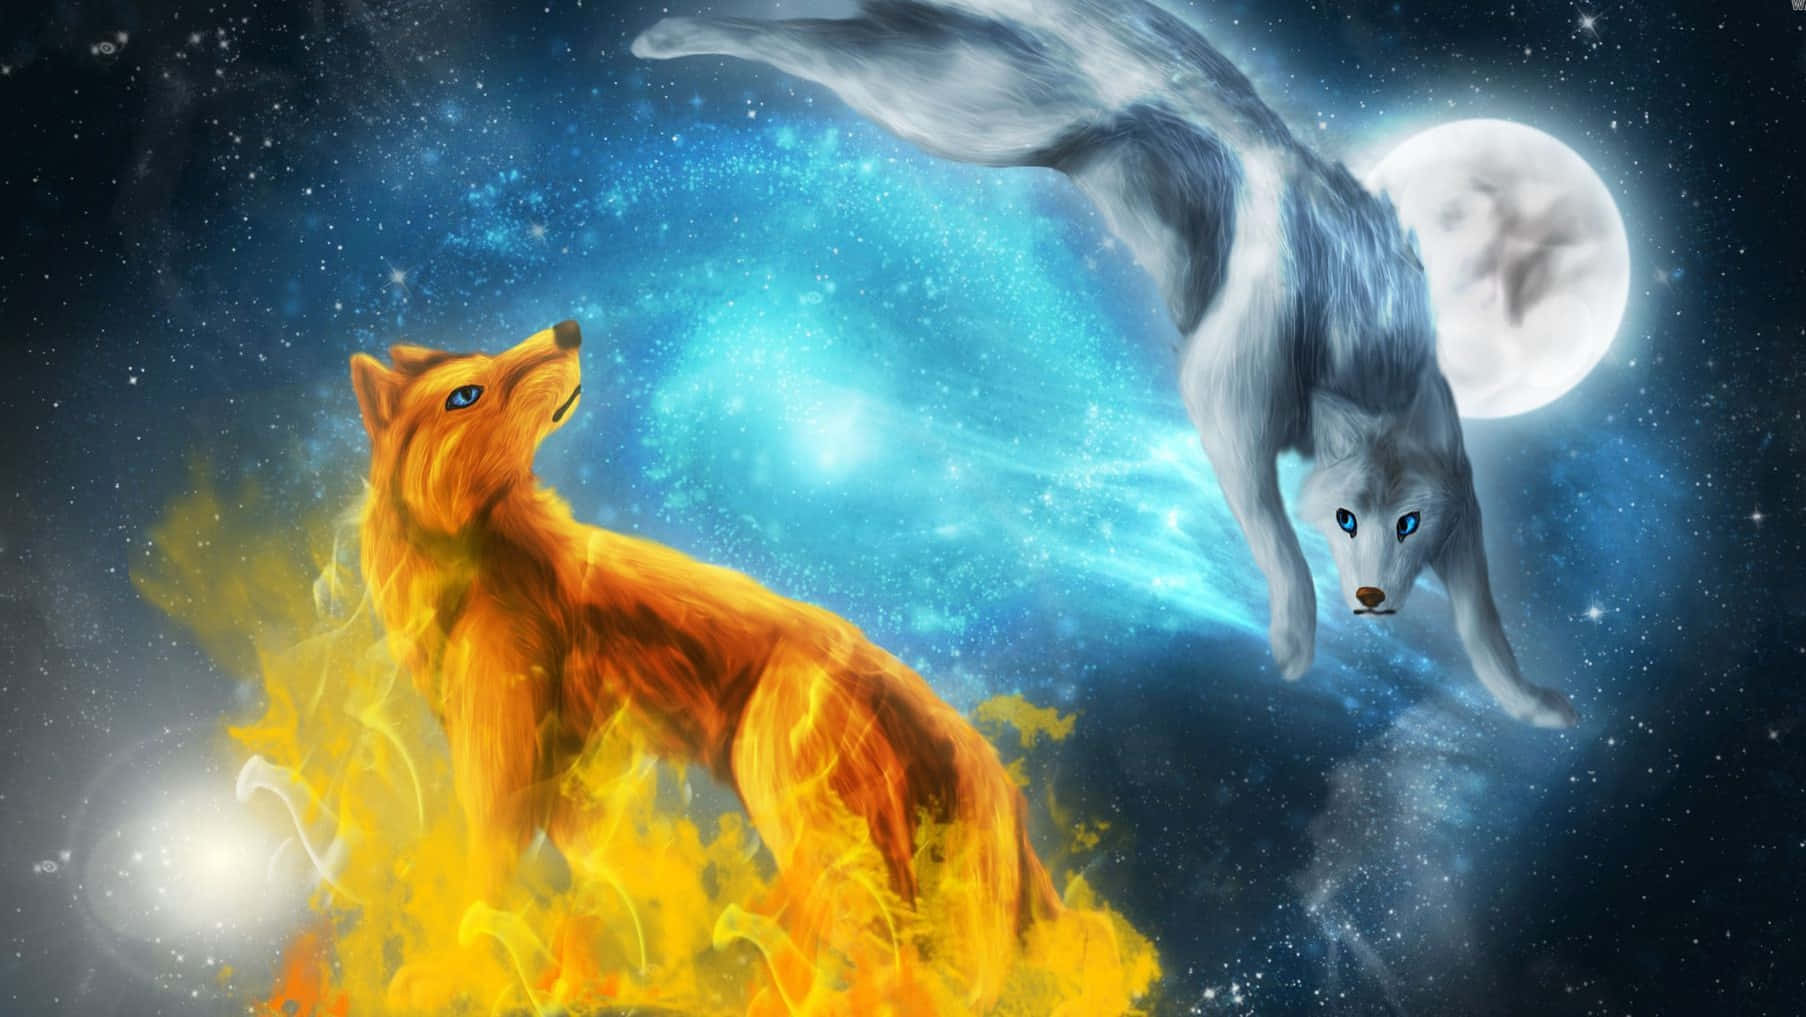 A powerful wolf blending elements of water and fire Wallpaper